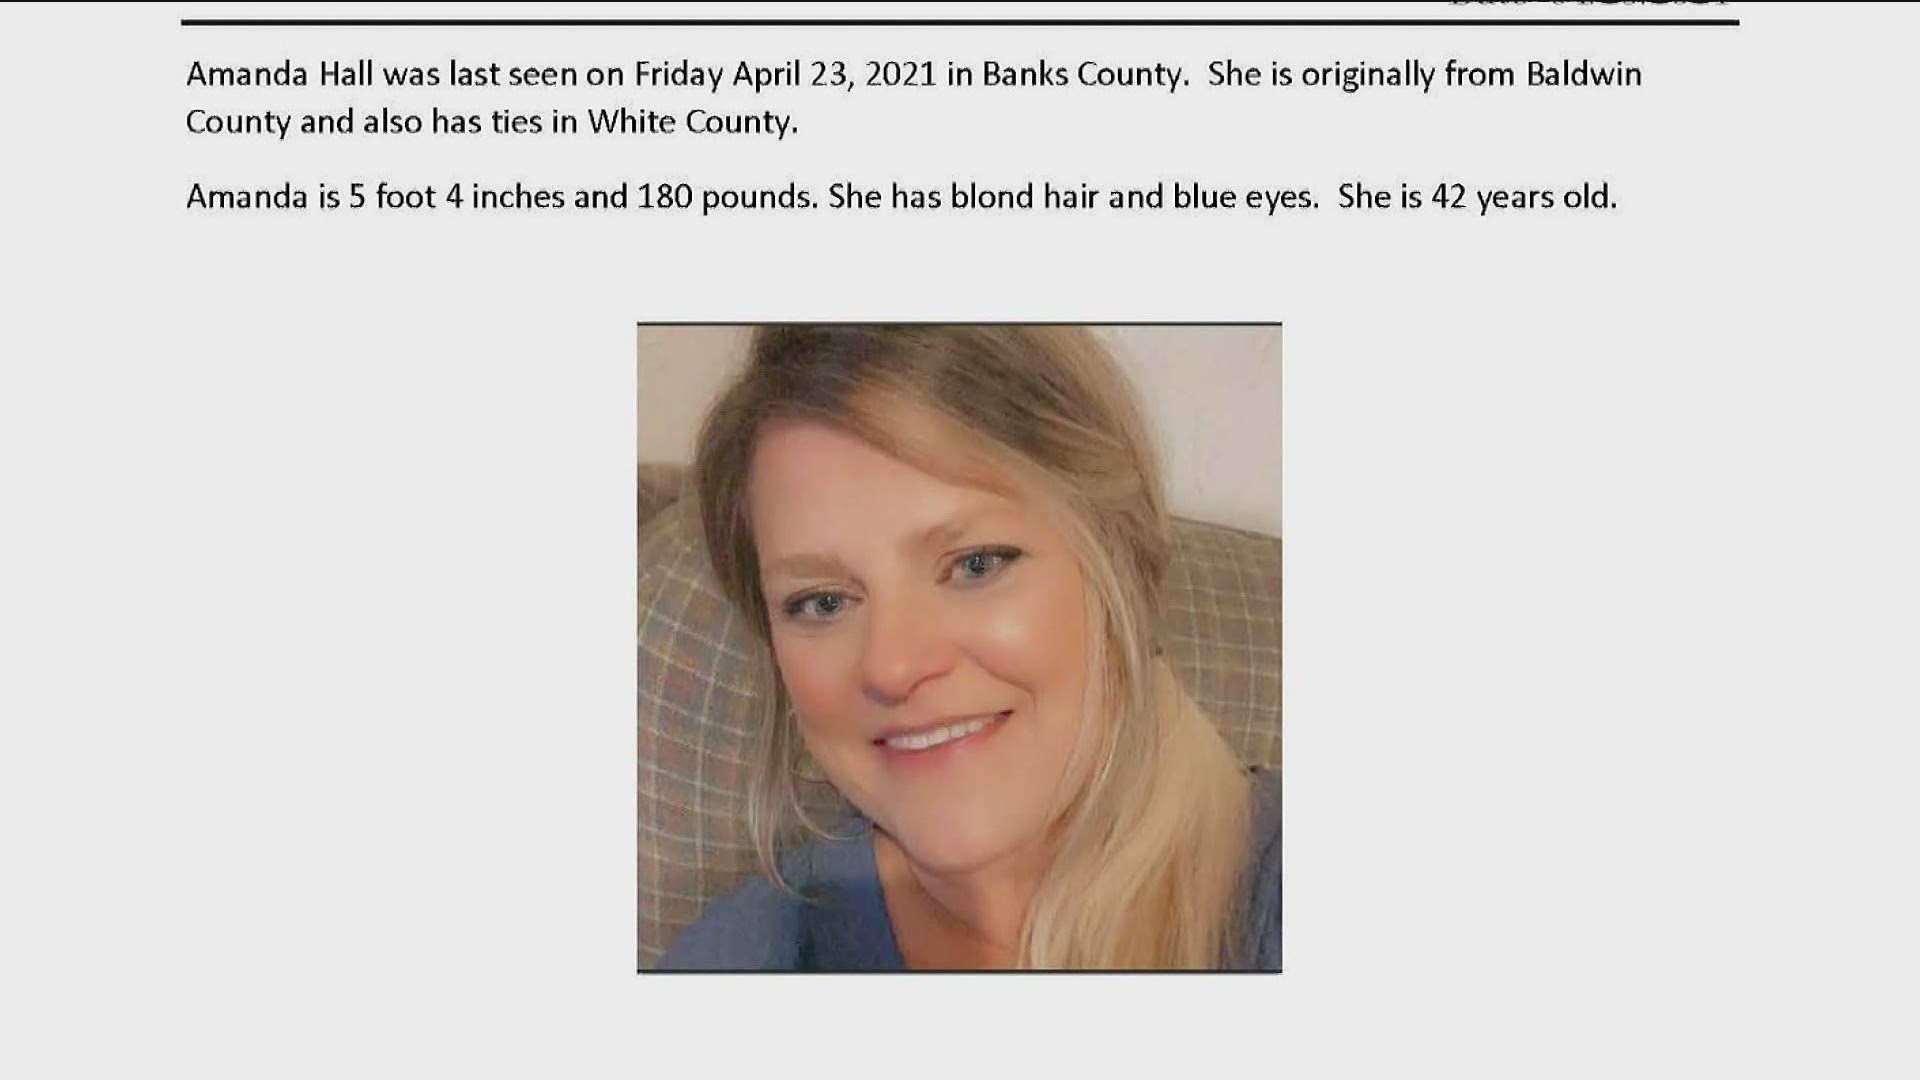 A woman missing since last Friday in Banks County was found dead on Wednesday, the sheriff's office reported.